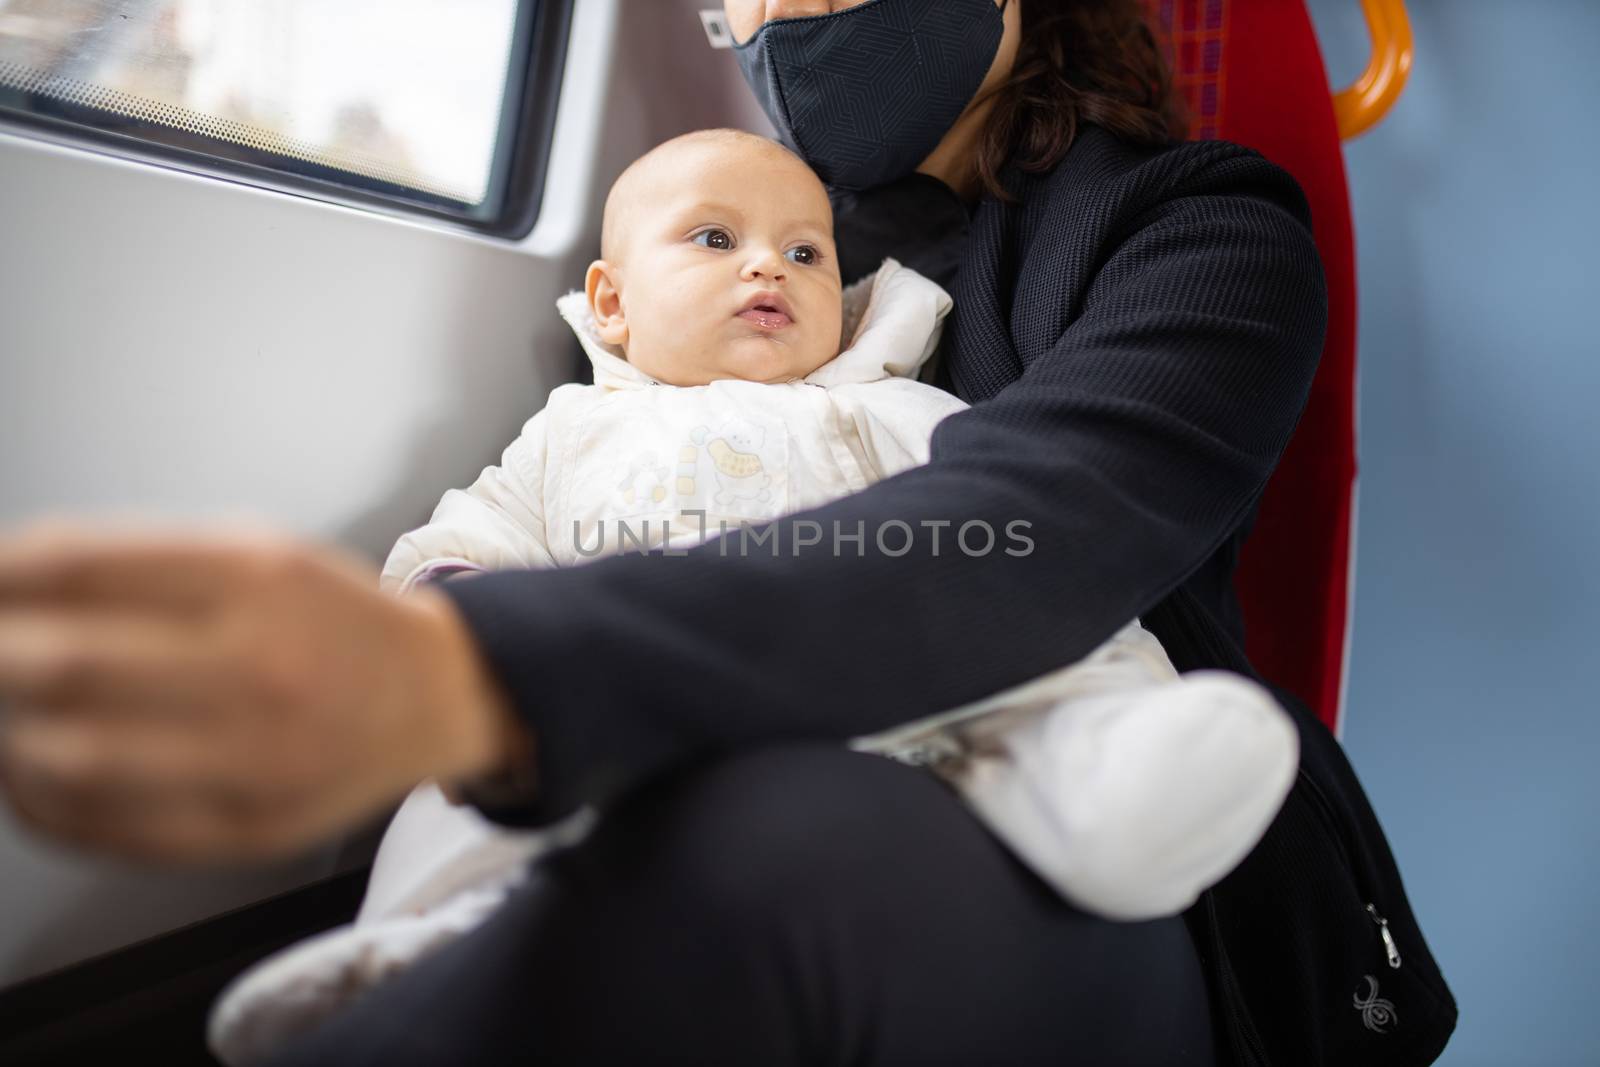 Distracted-looking baby in white clothing resting on the legs of her mother who wears a face mask and sits next to a window